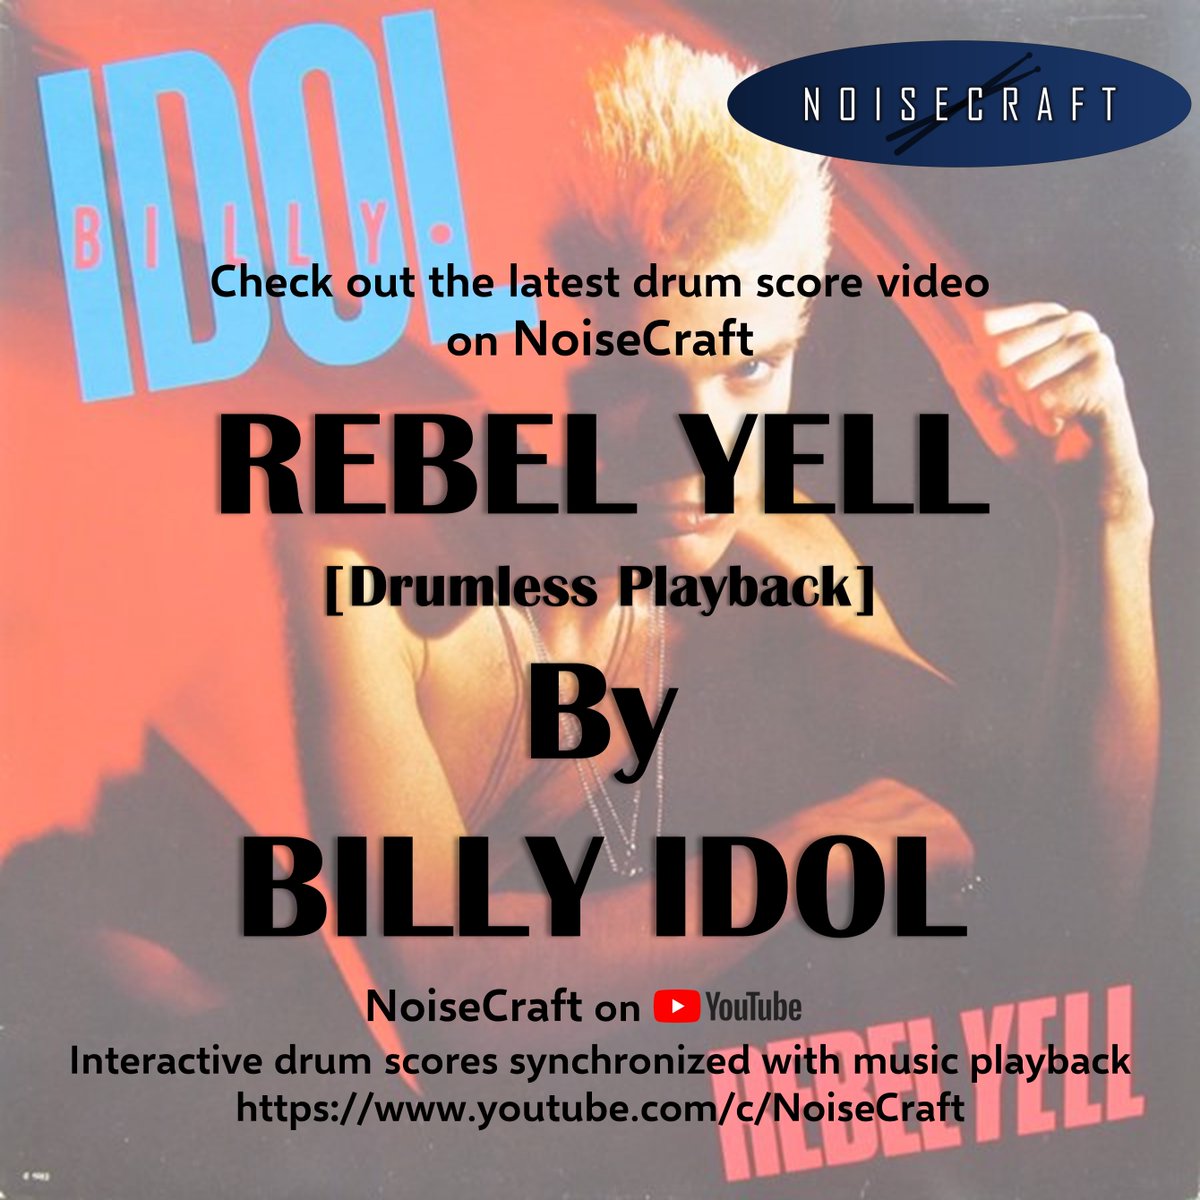 Check out the latest drum sheet video on NoiseCraft:
Billy Idol - Rebel Yell Drum Score with music playback !
youtu.be/tuGp7qM9Fvg

#billyidol #rebelyell #drumless #drumlessons #NOiSECRAFT #drummersoftheworld #drumcover #drumscore #drumming #drummers #drummer #rockdrummer